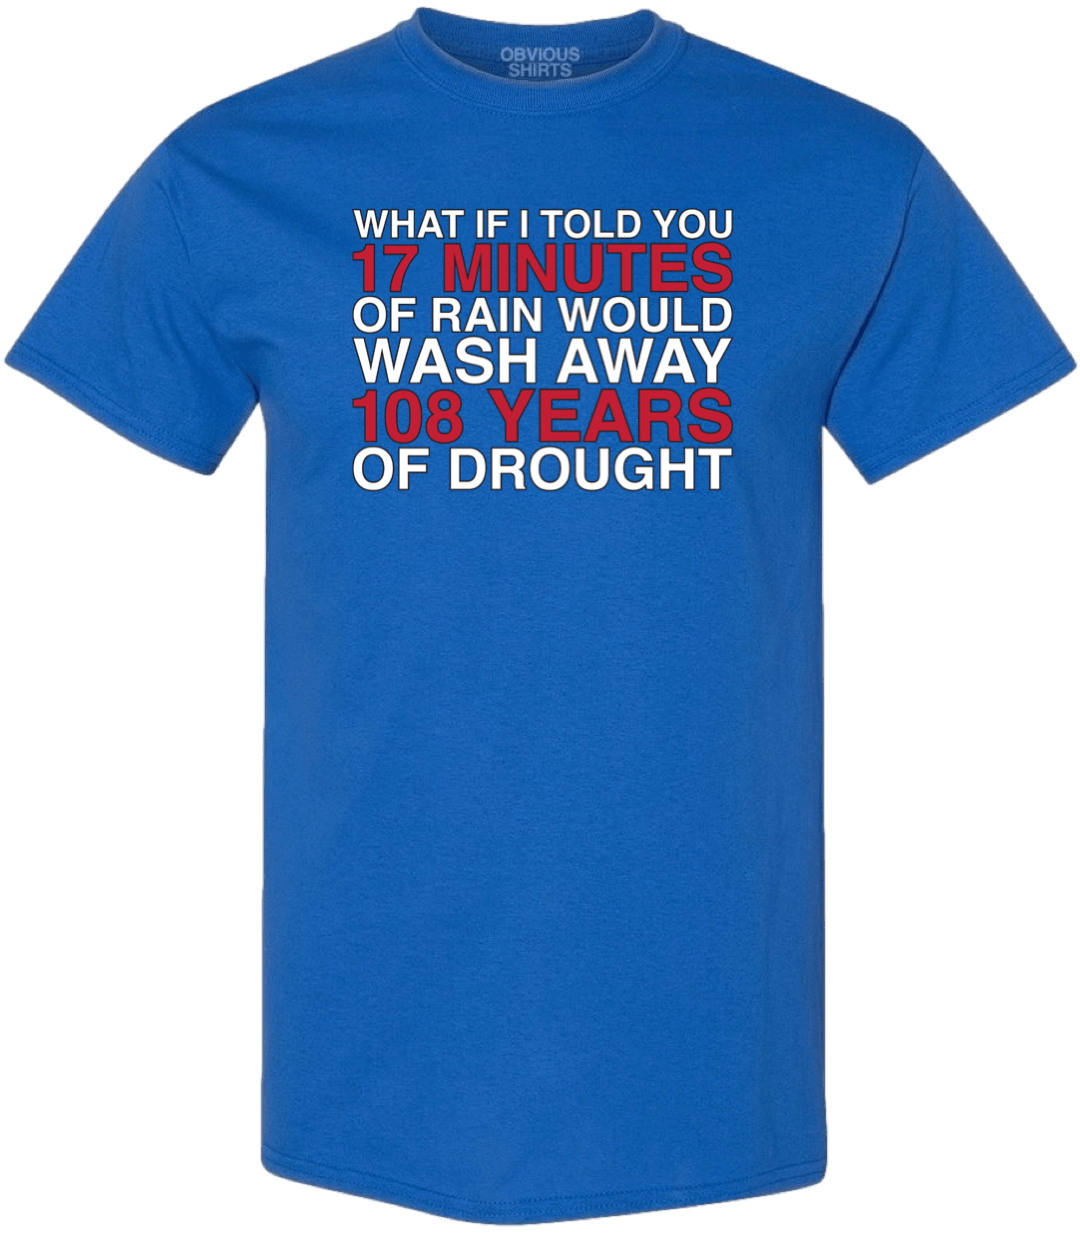 WHAT IF I TOLD YOU... (BIG & TALL) - OBVIOUS SHIRTS